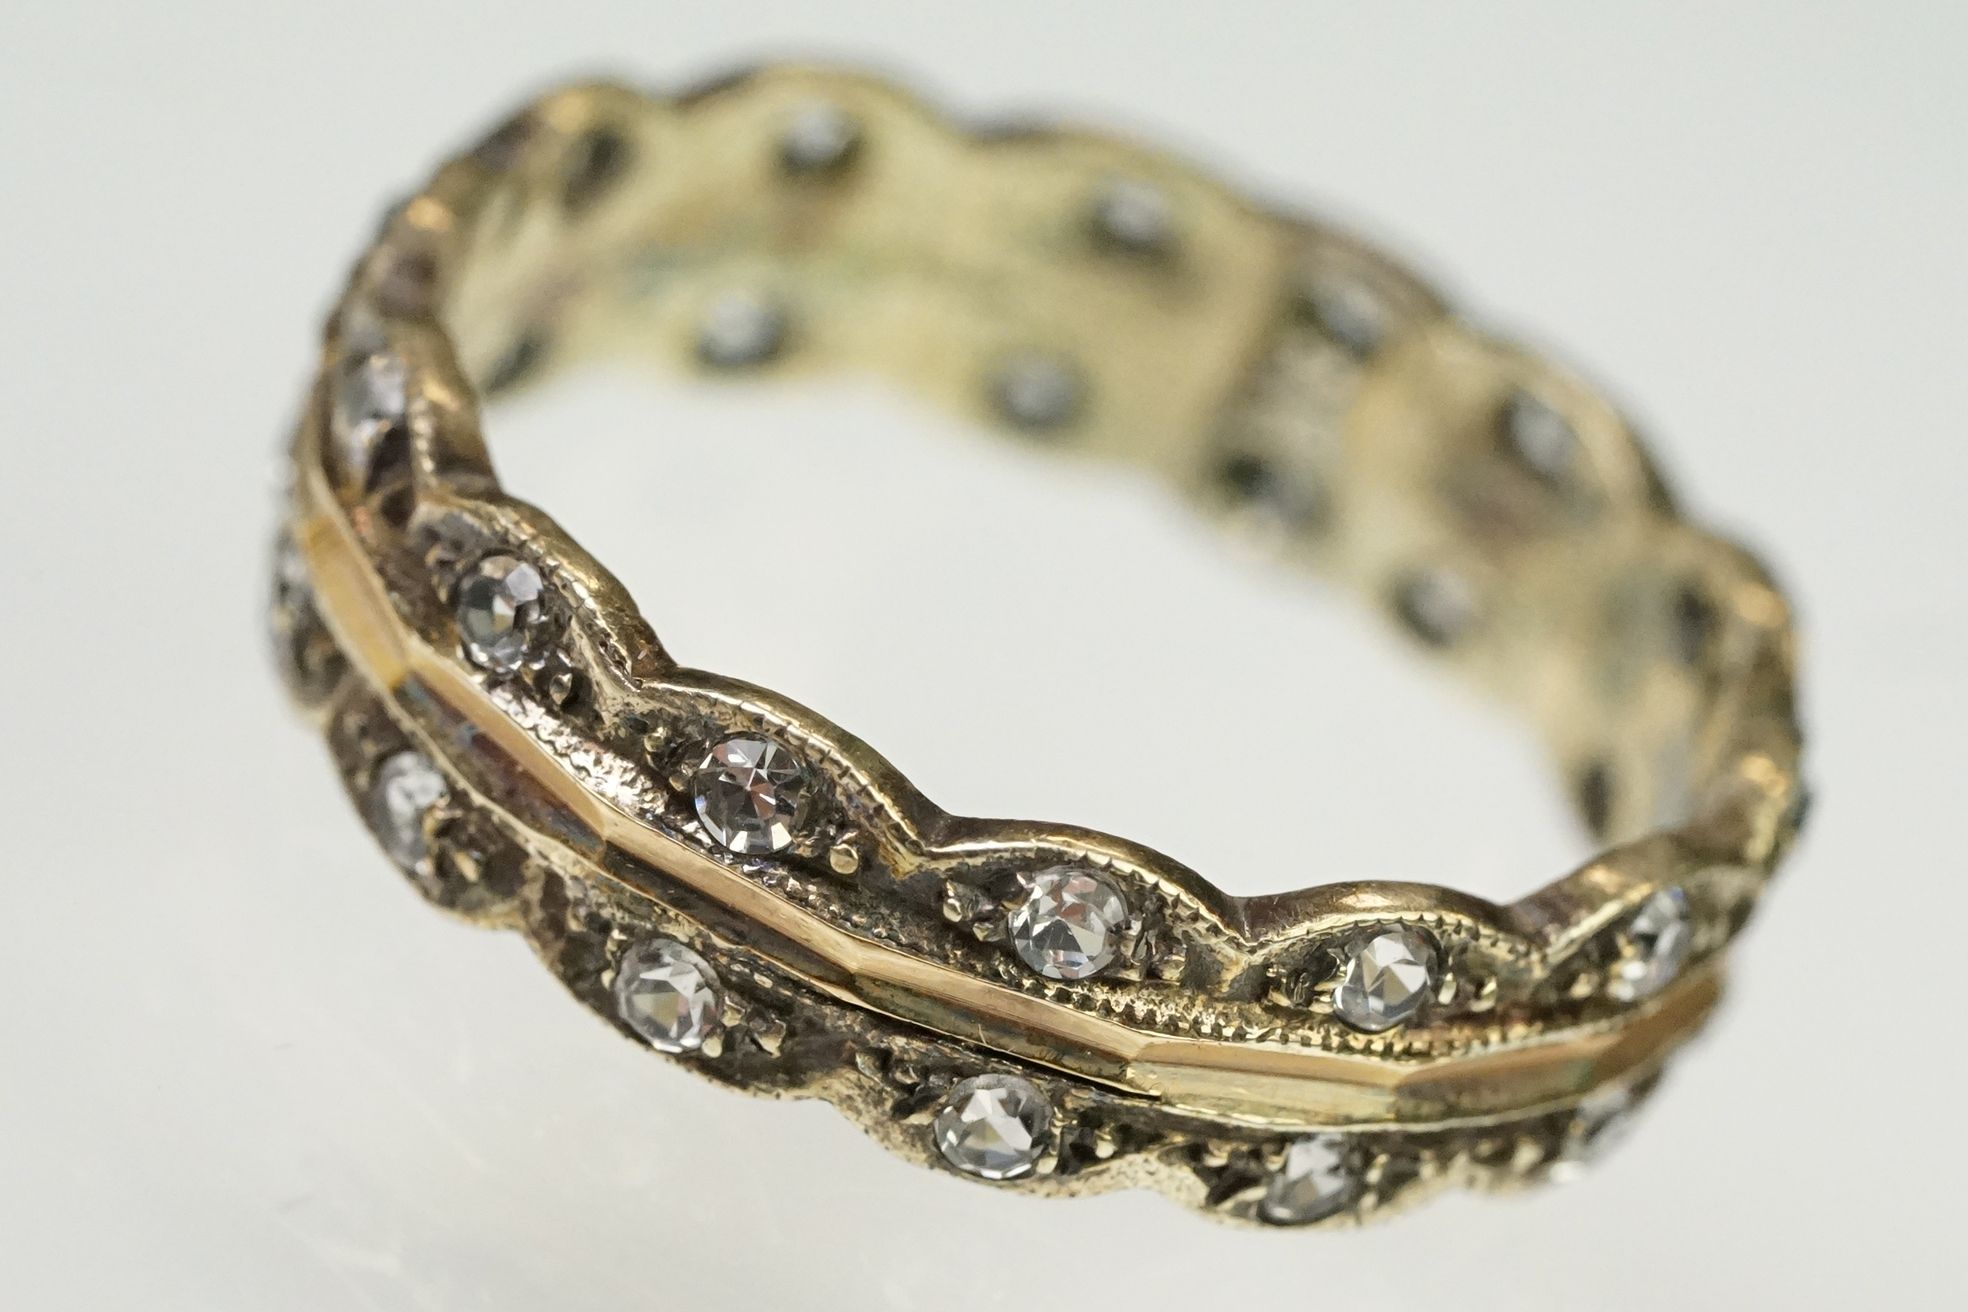 9ct gold hallmarked two tone eternity ring. The ring having a faceted rose gold centre with - Image 3 of 5